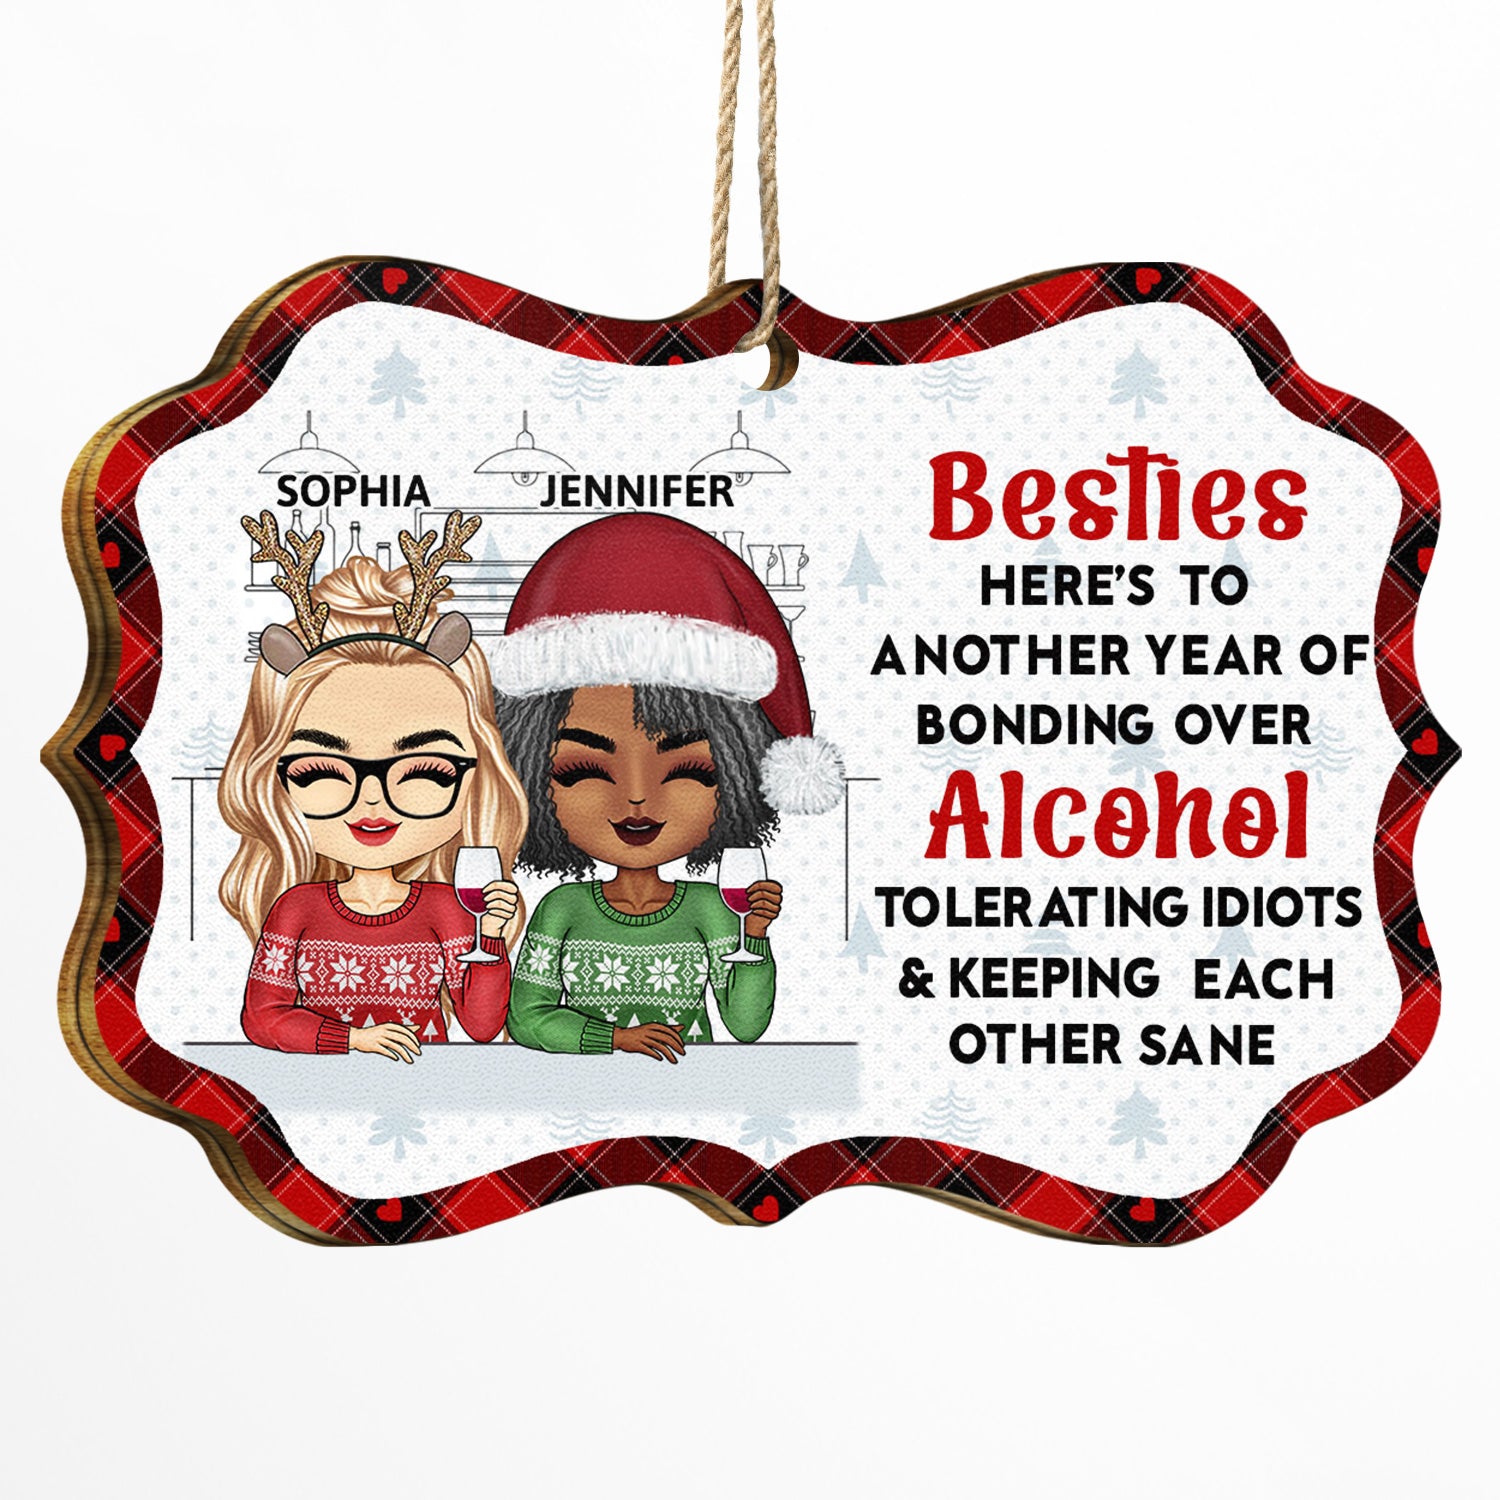 Here's To Another Year Of Bonding Over Alcohol - Christmas Gifts For Best Friends, Besties - Personalized Medallion Wooden Ornament